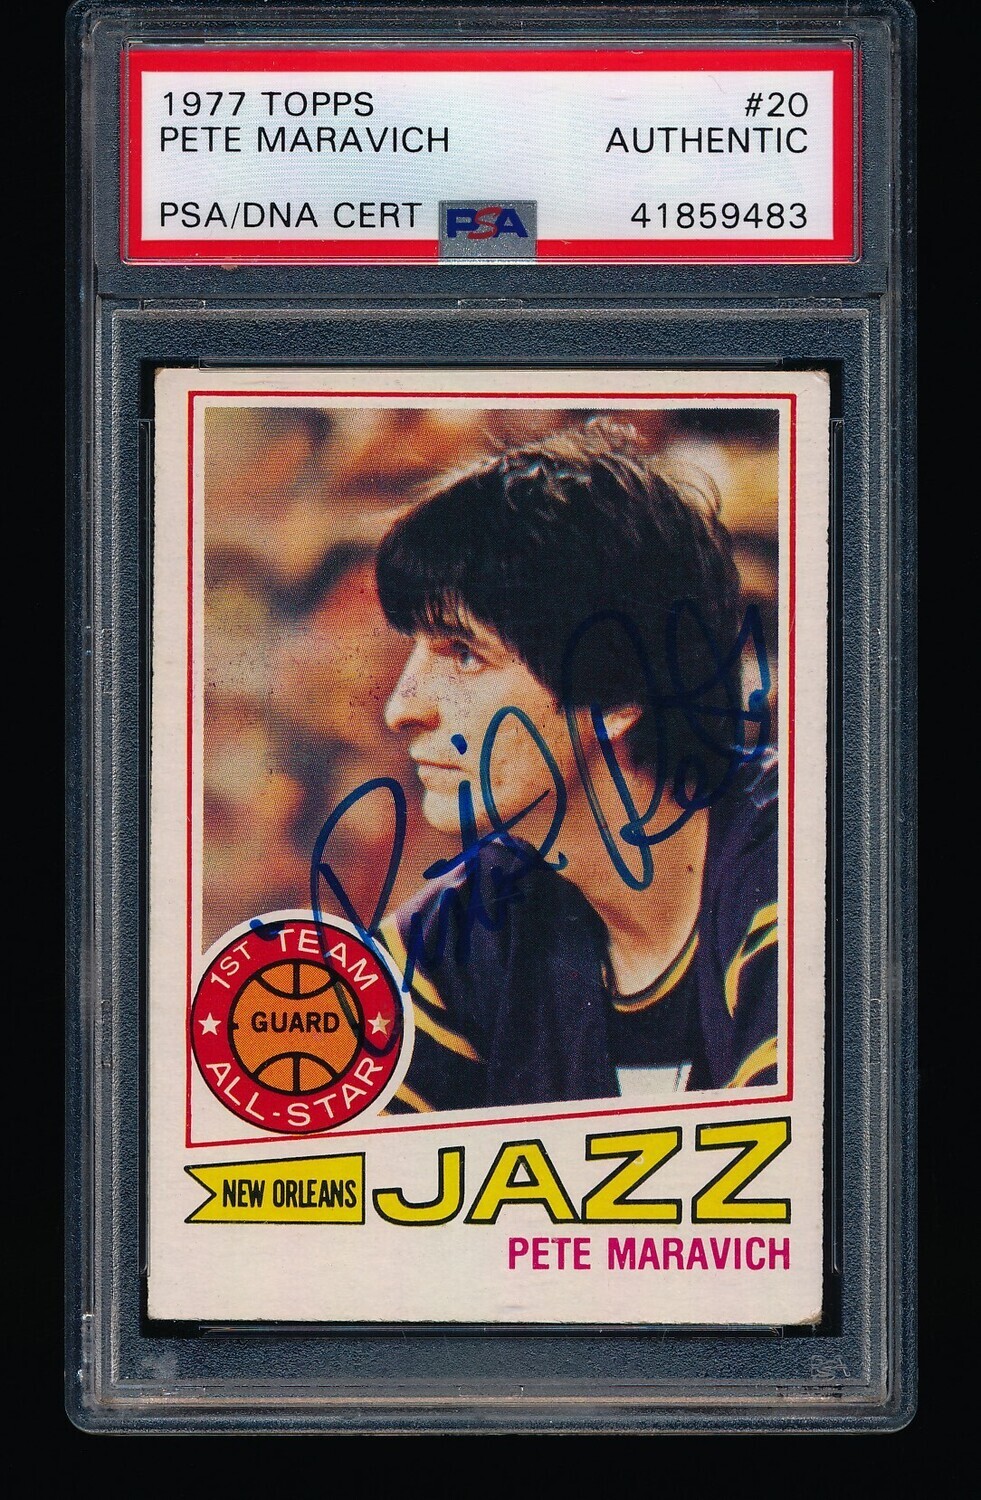 1977 Topps Signed Autographed 'PISTOL' PETE MARAVICH #20 PSA/DNA A